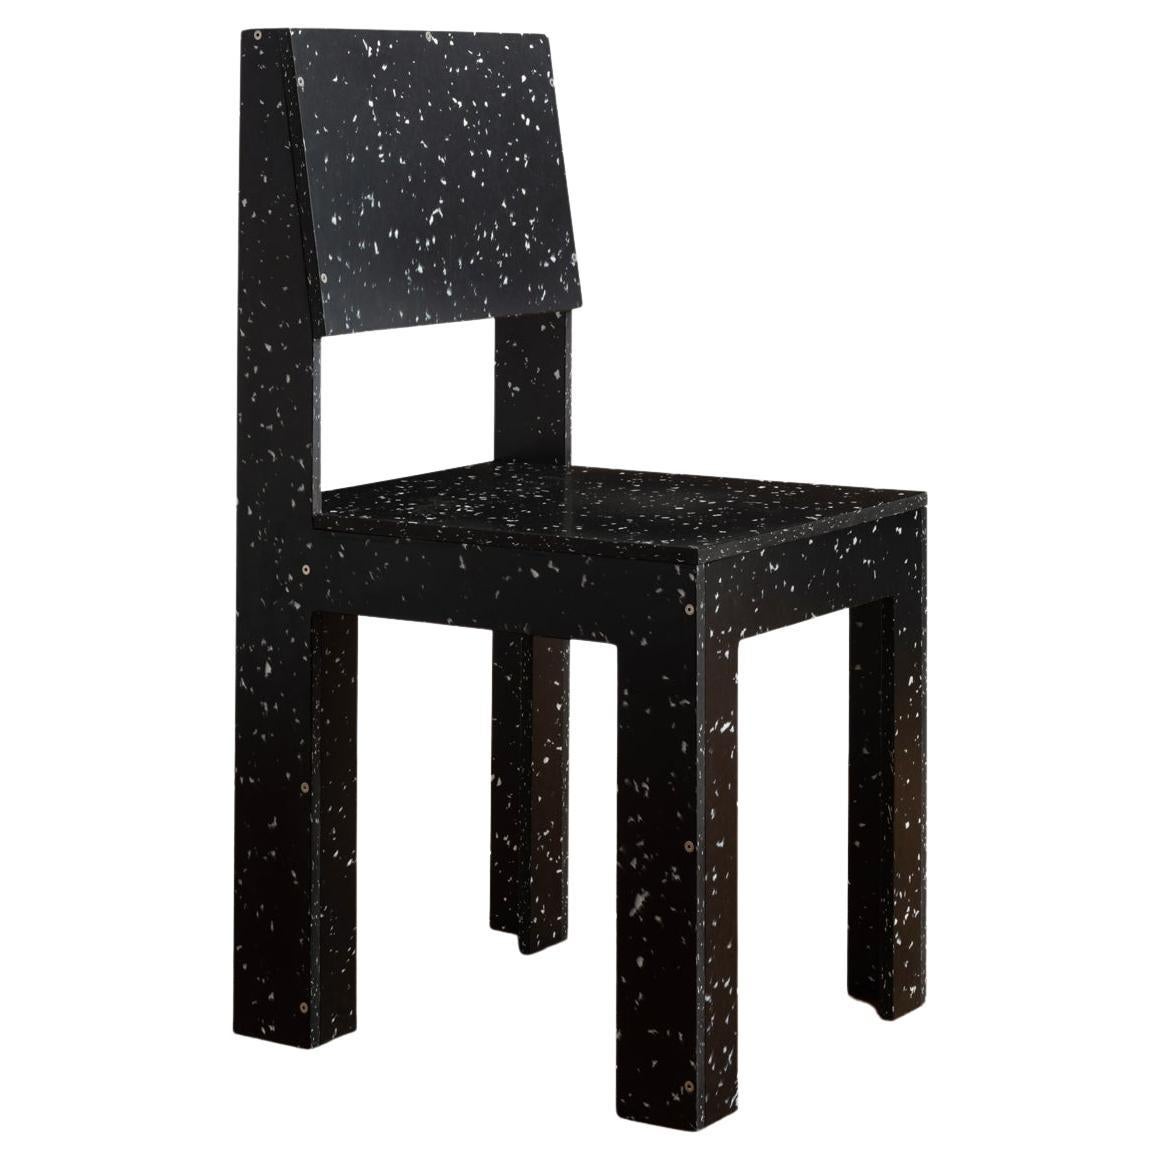 Recycled-Plastic 'RCP2 Chair' in Black & White by Jane Atfield